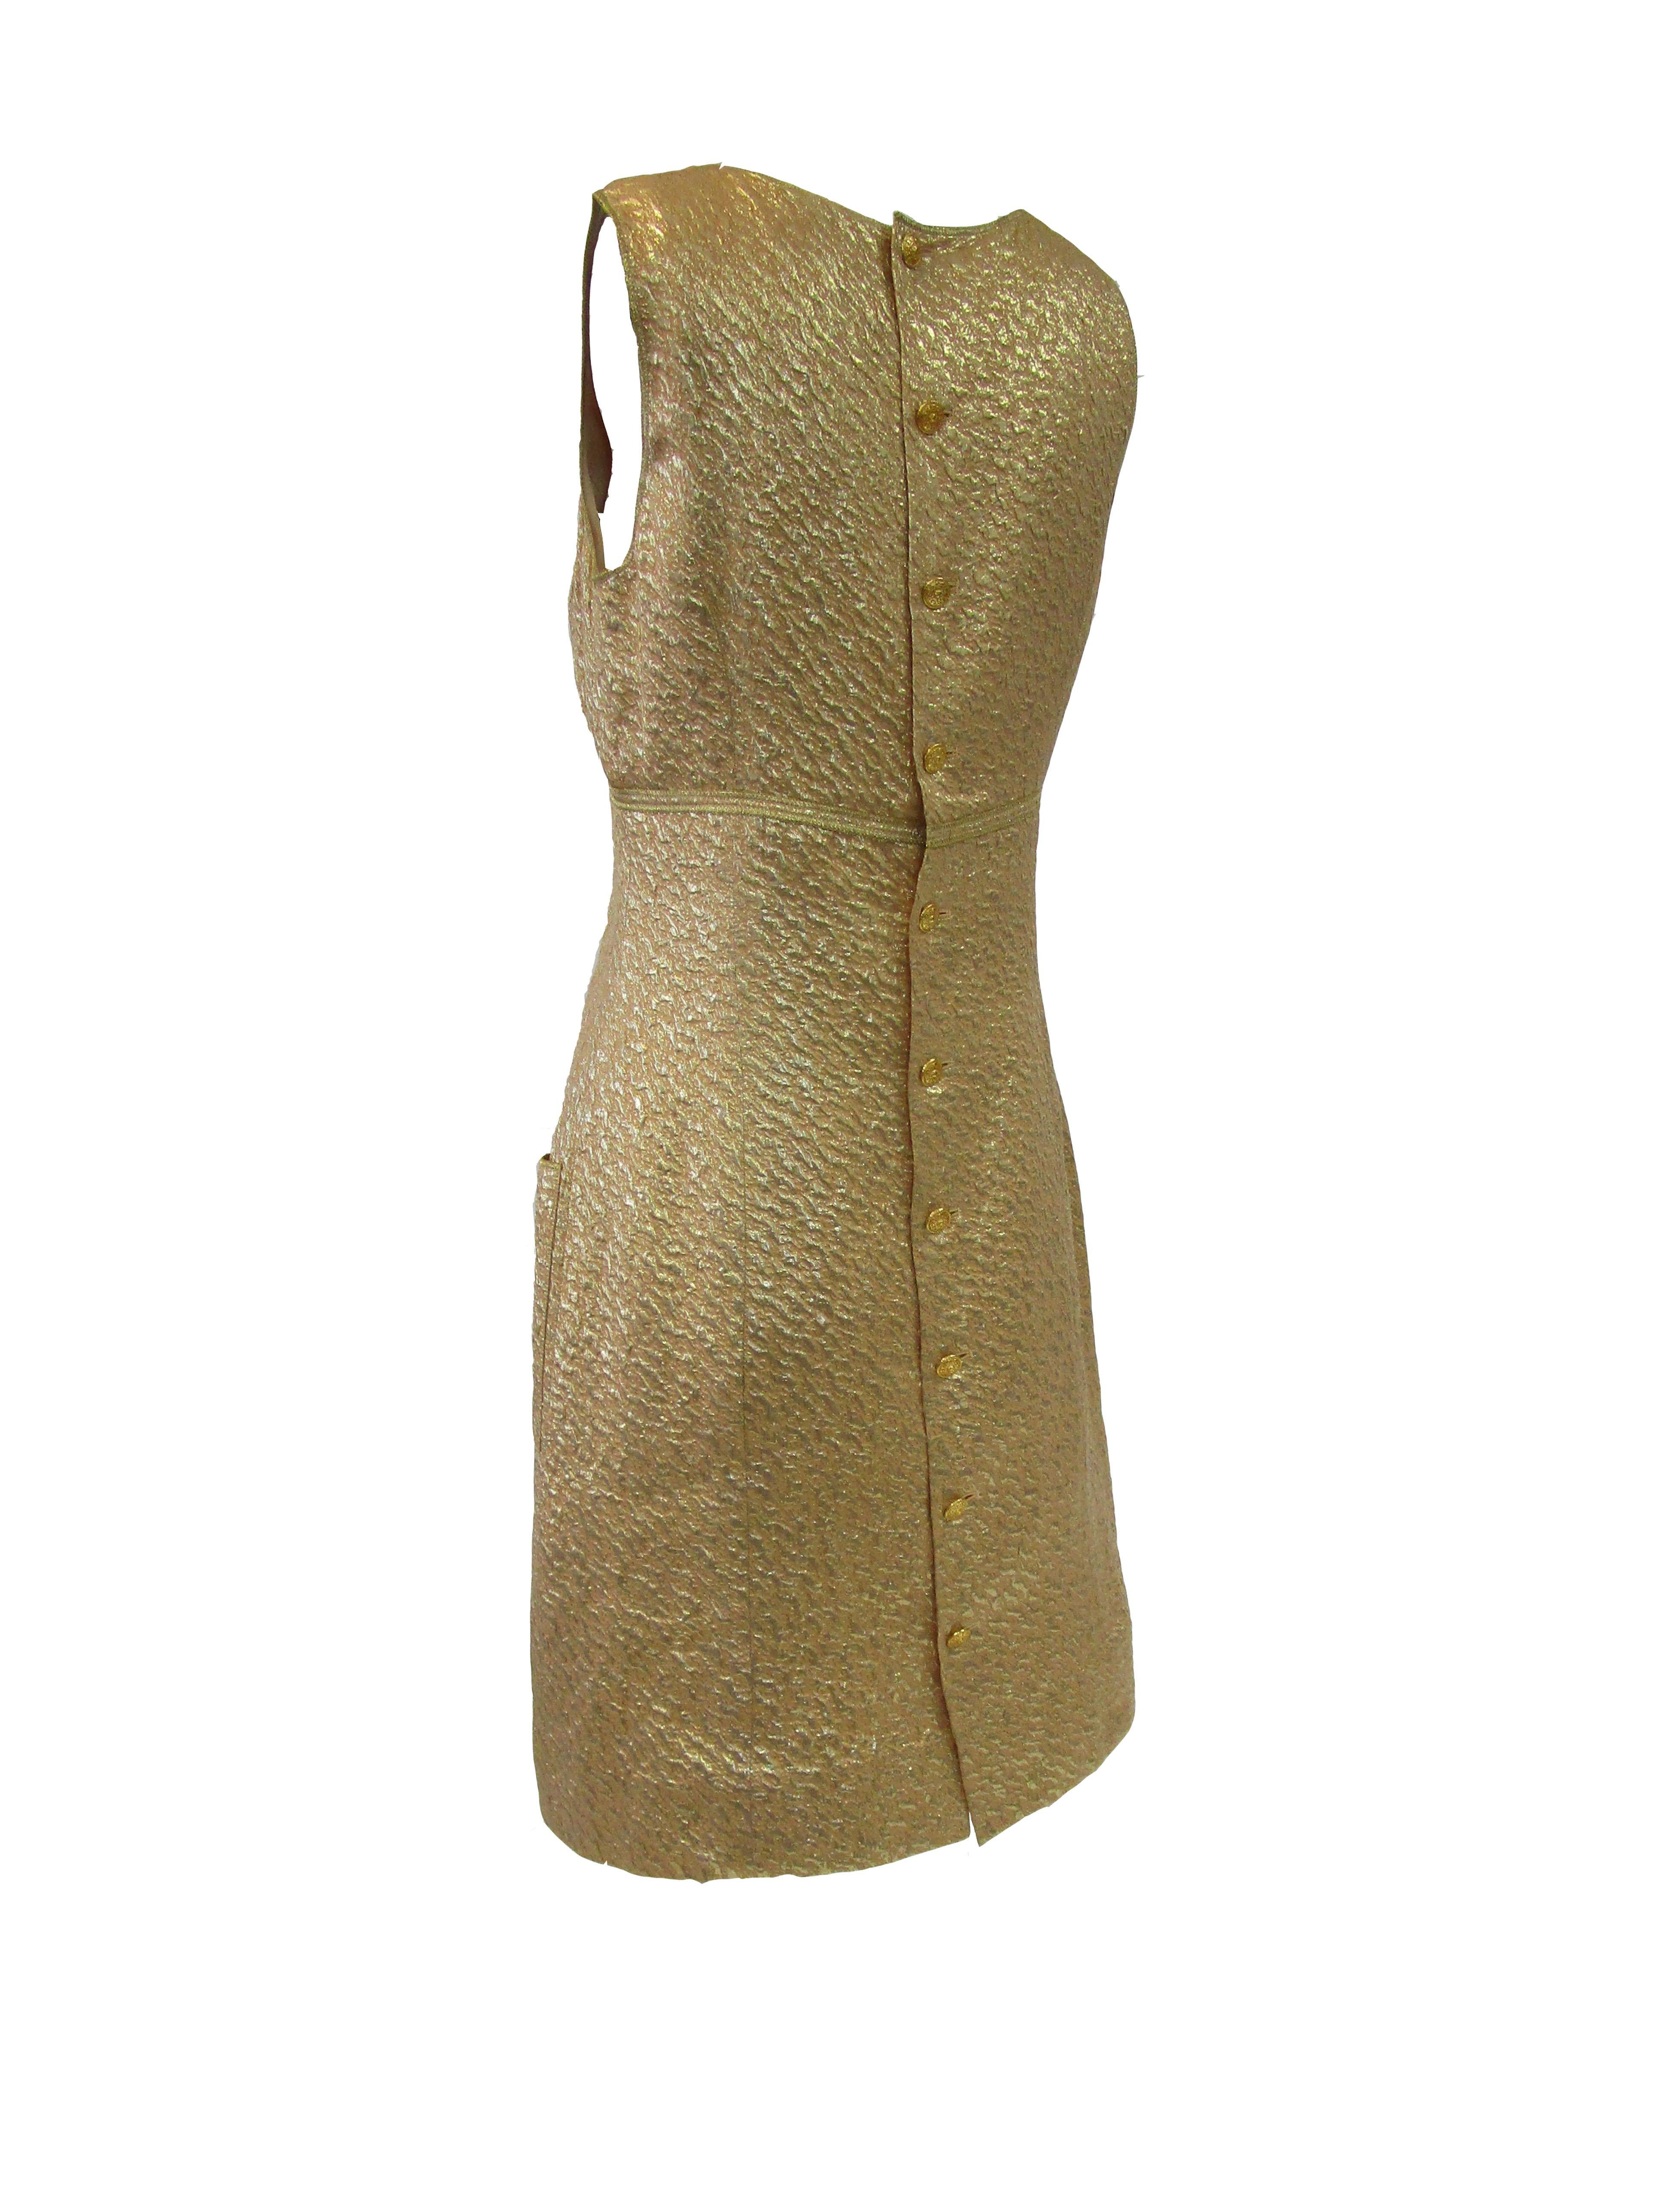 1996 Chanel by Lagerfeld Golden Boucle and Lame Shift Dress and Coat For Sale 1